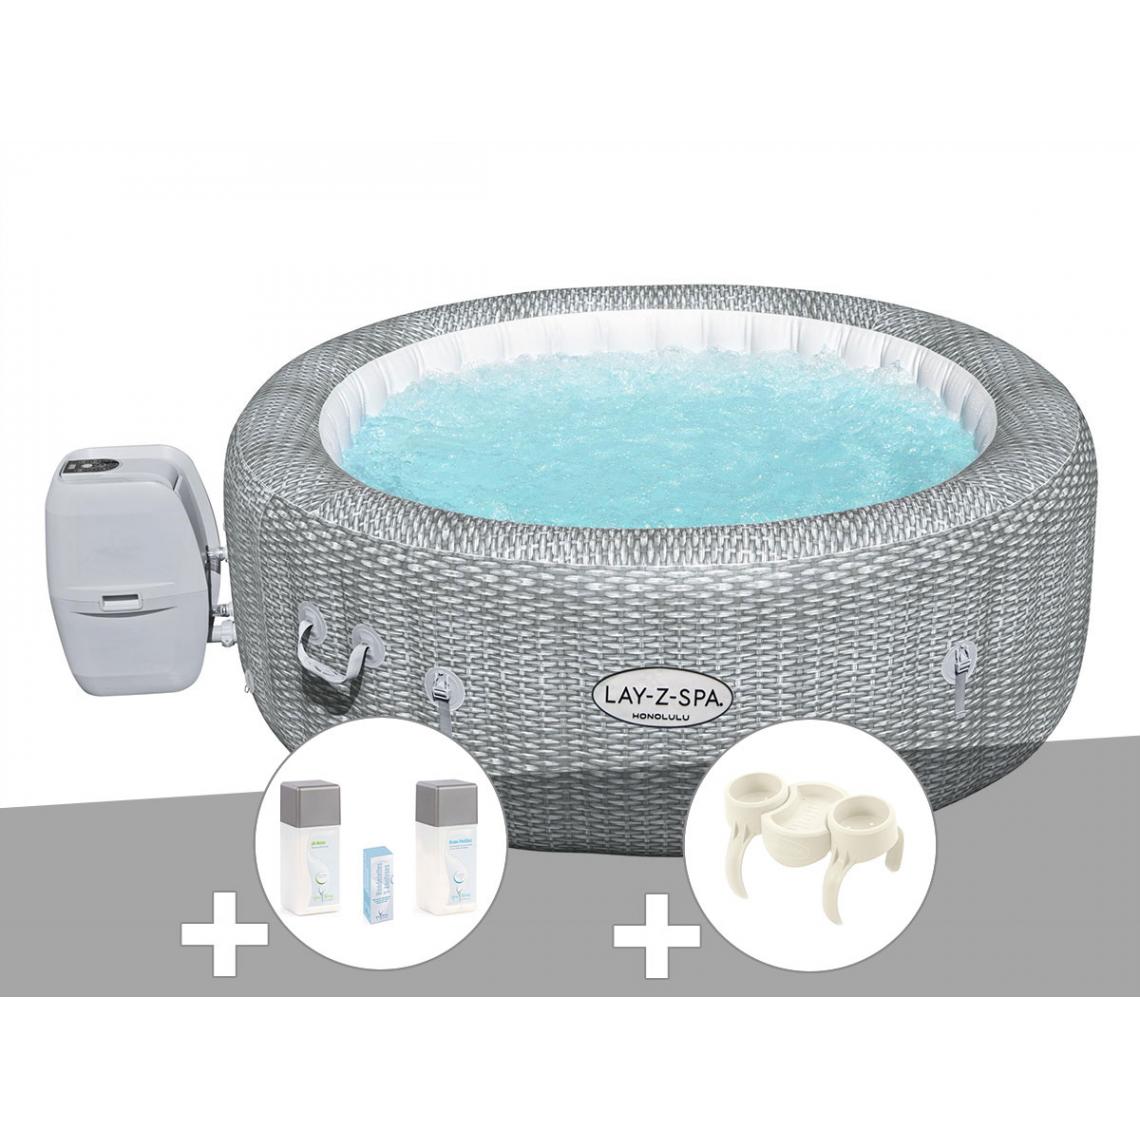 Bestway - Kit spa gonflable Bestway Lay-Z-Spa Honolulu rond Airjet 4/6 places + Kit traitement brome + Porte-gobelets - Spa gonflable